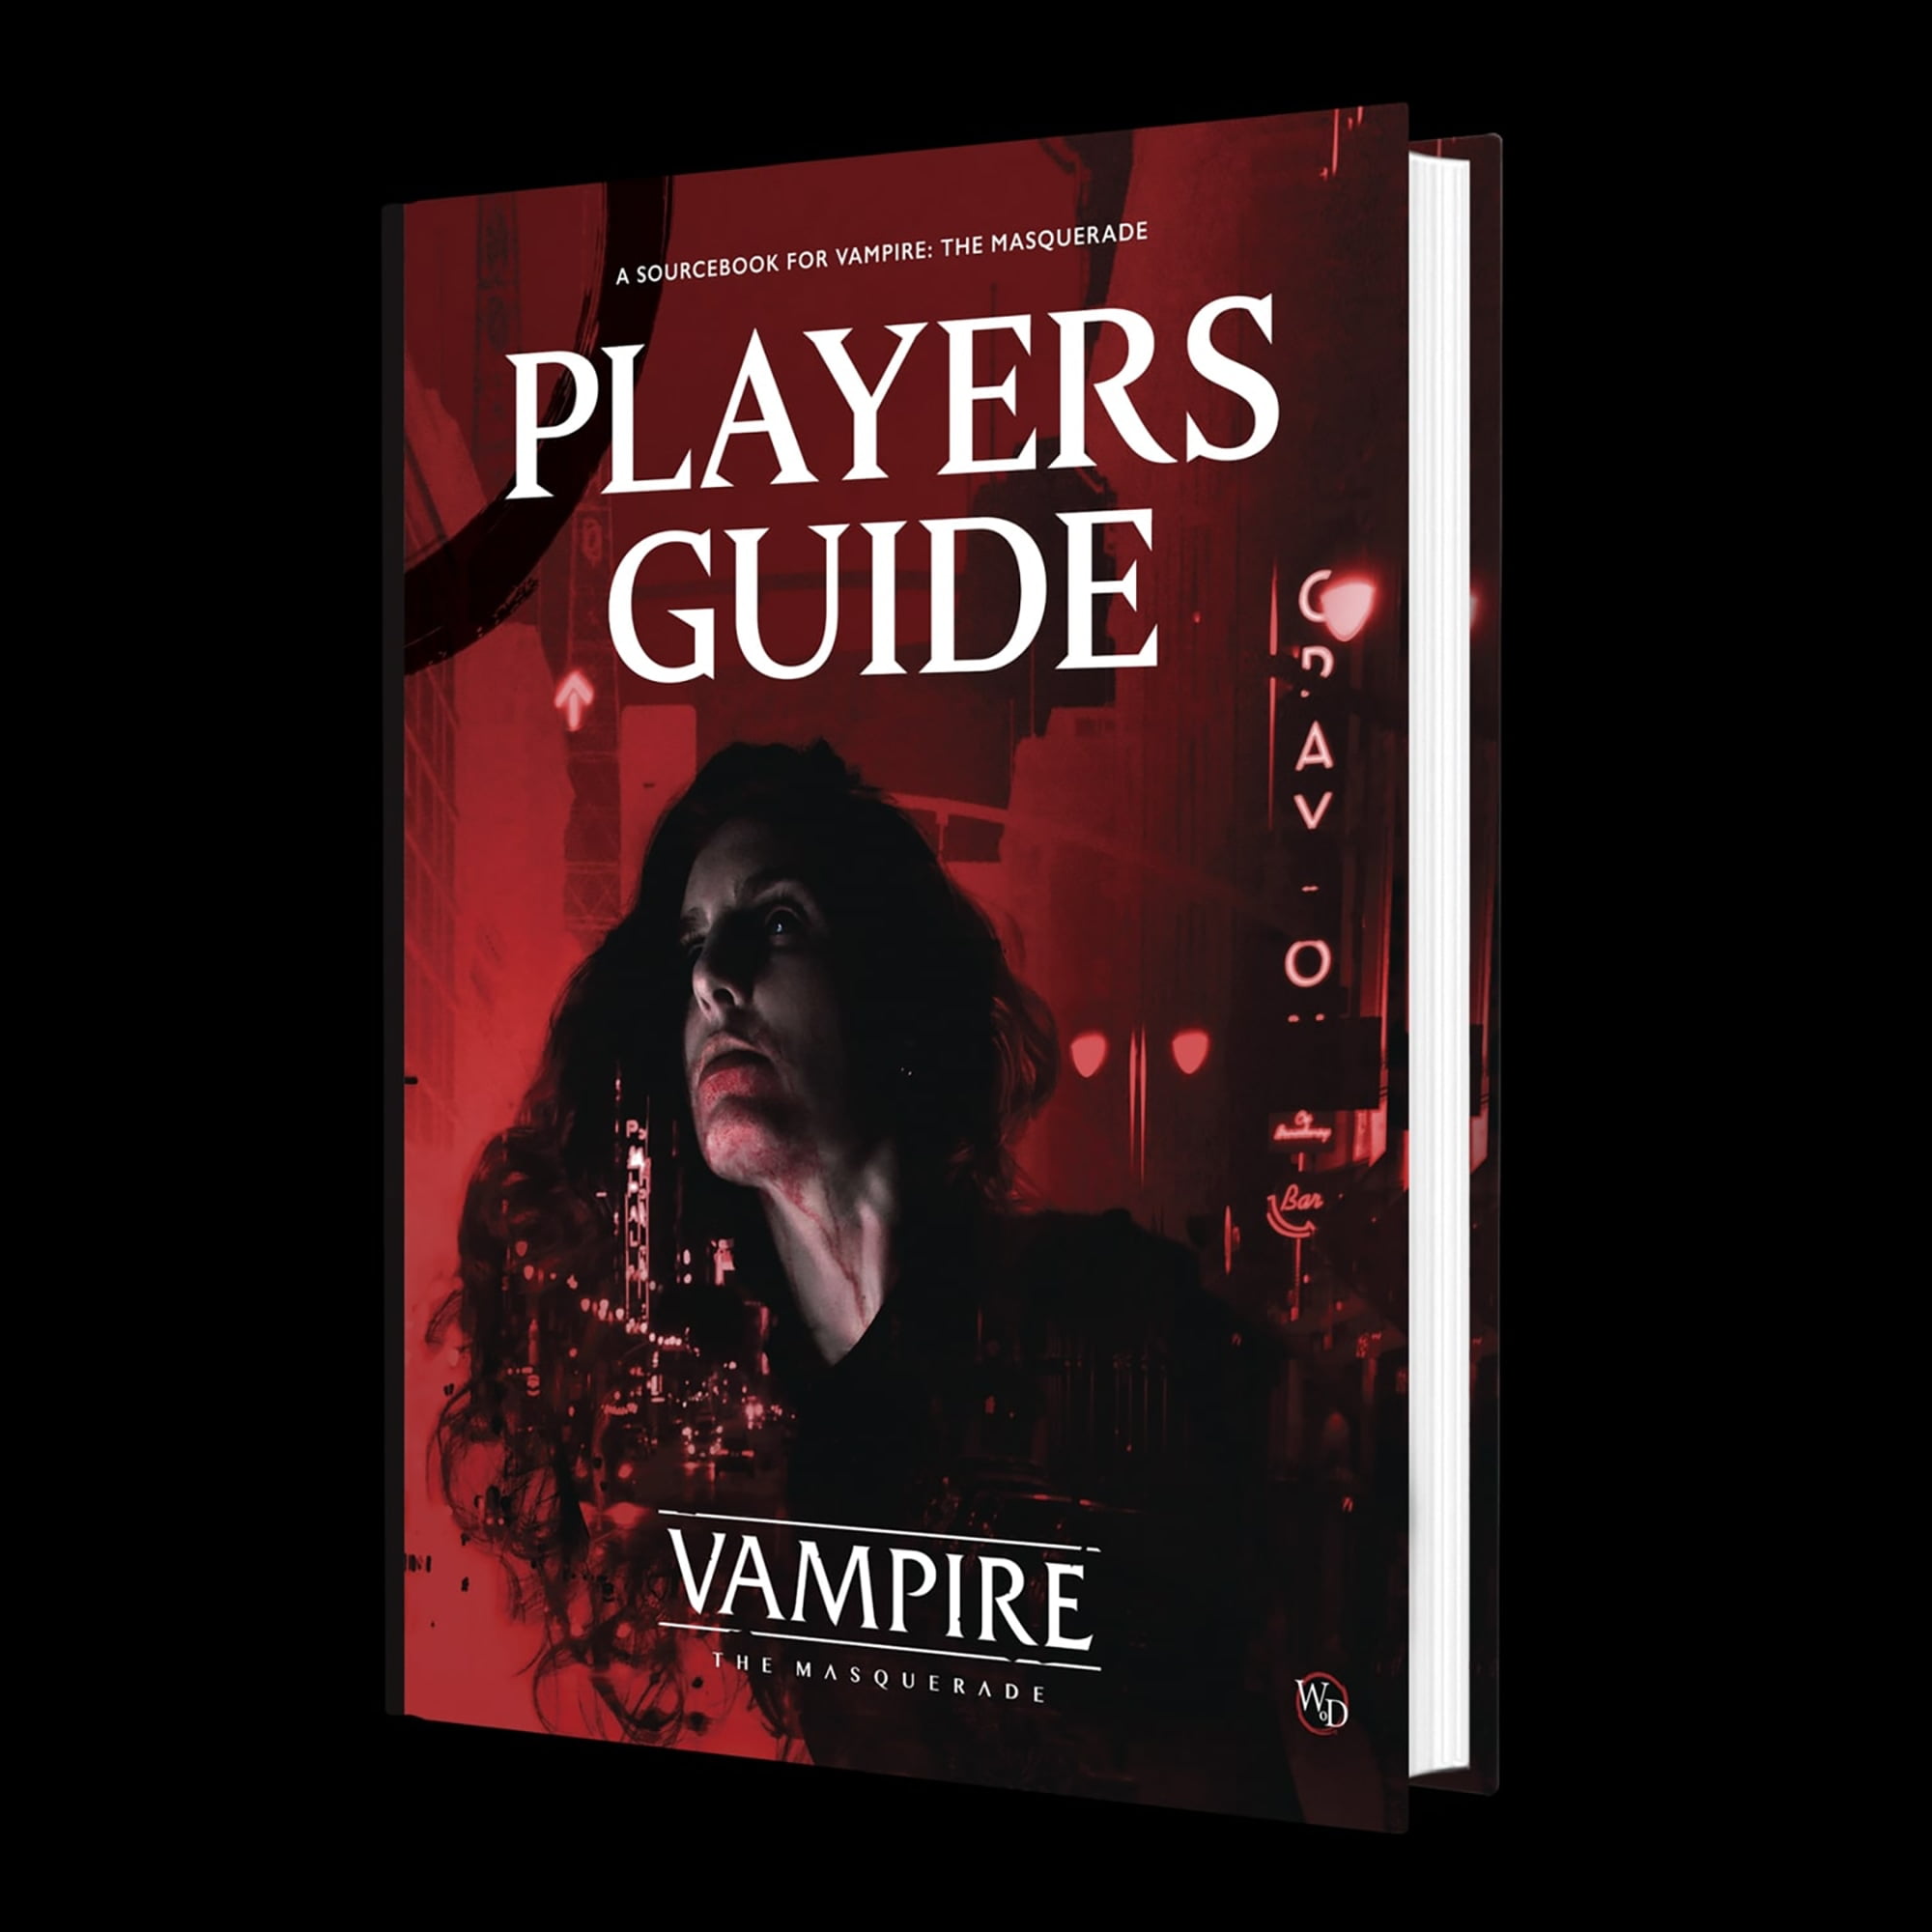 Vampire: The Masquerade 5th Edition Roleplaying Game Blood-Stained Love  Sourcebook PRE-ORDER